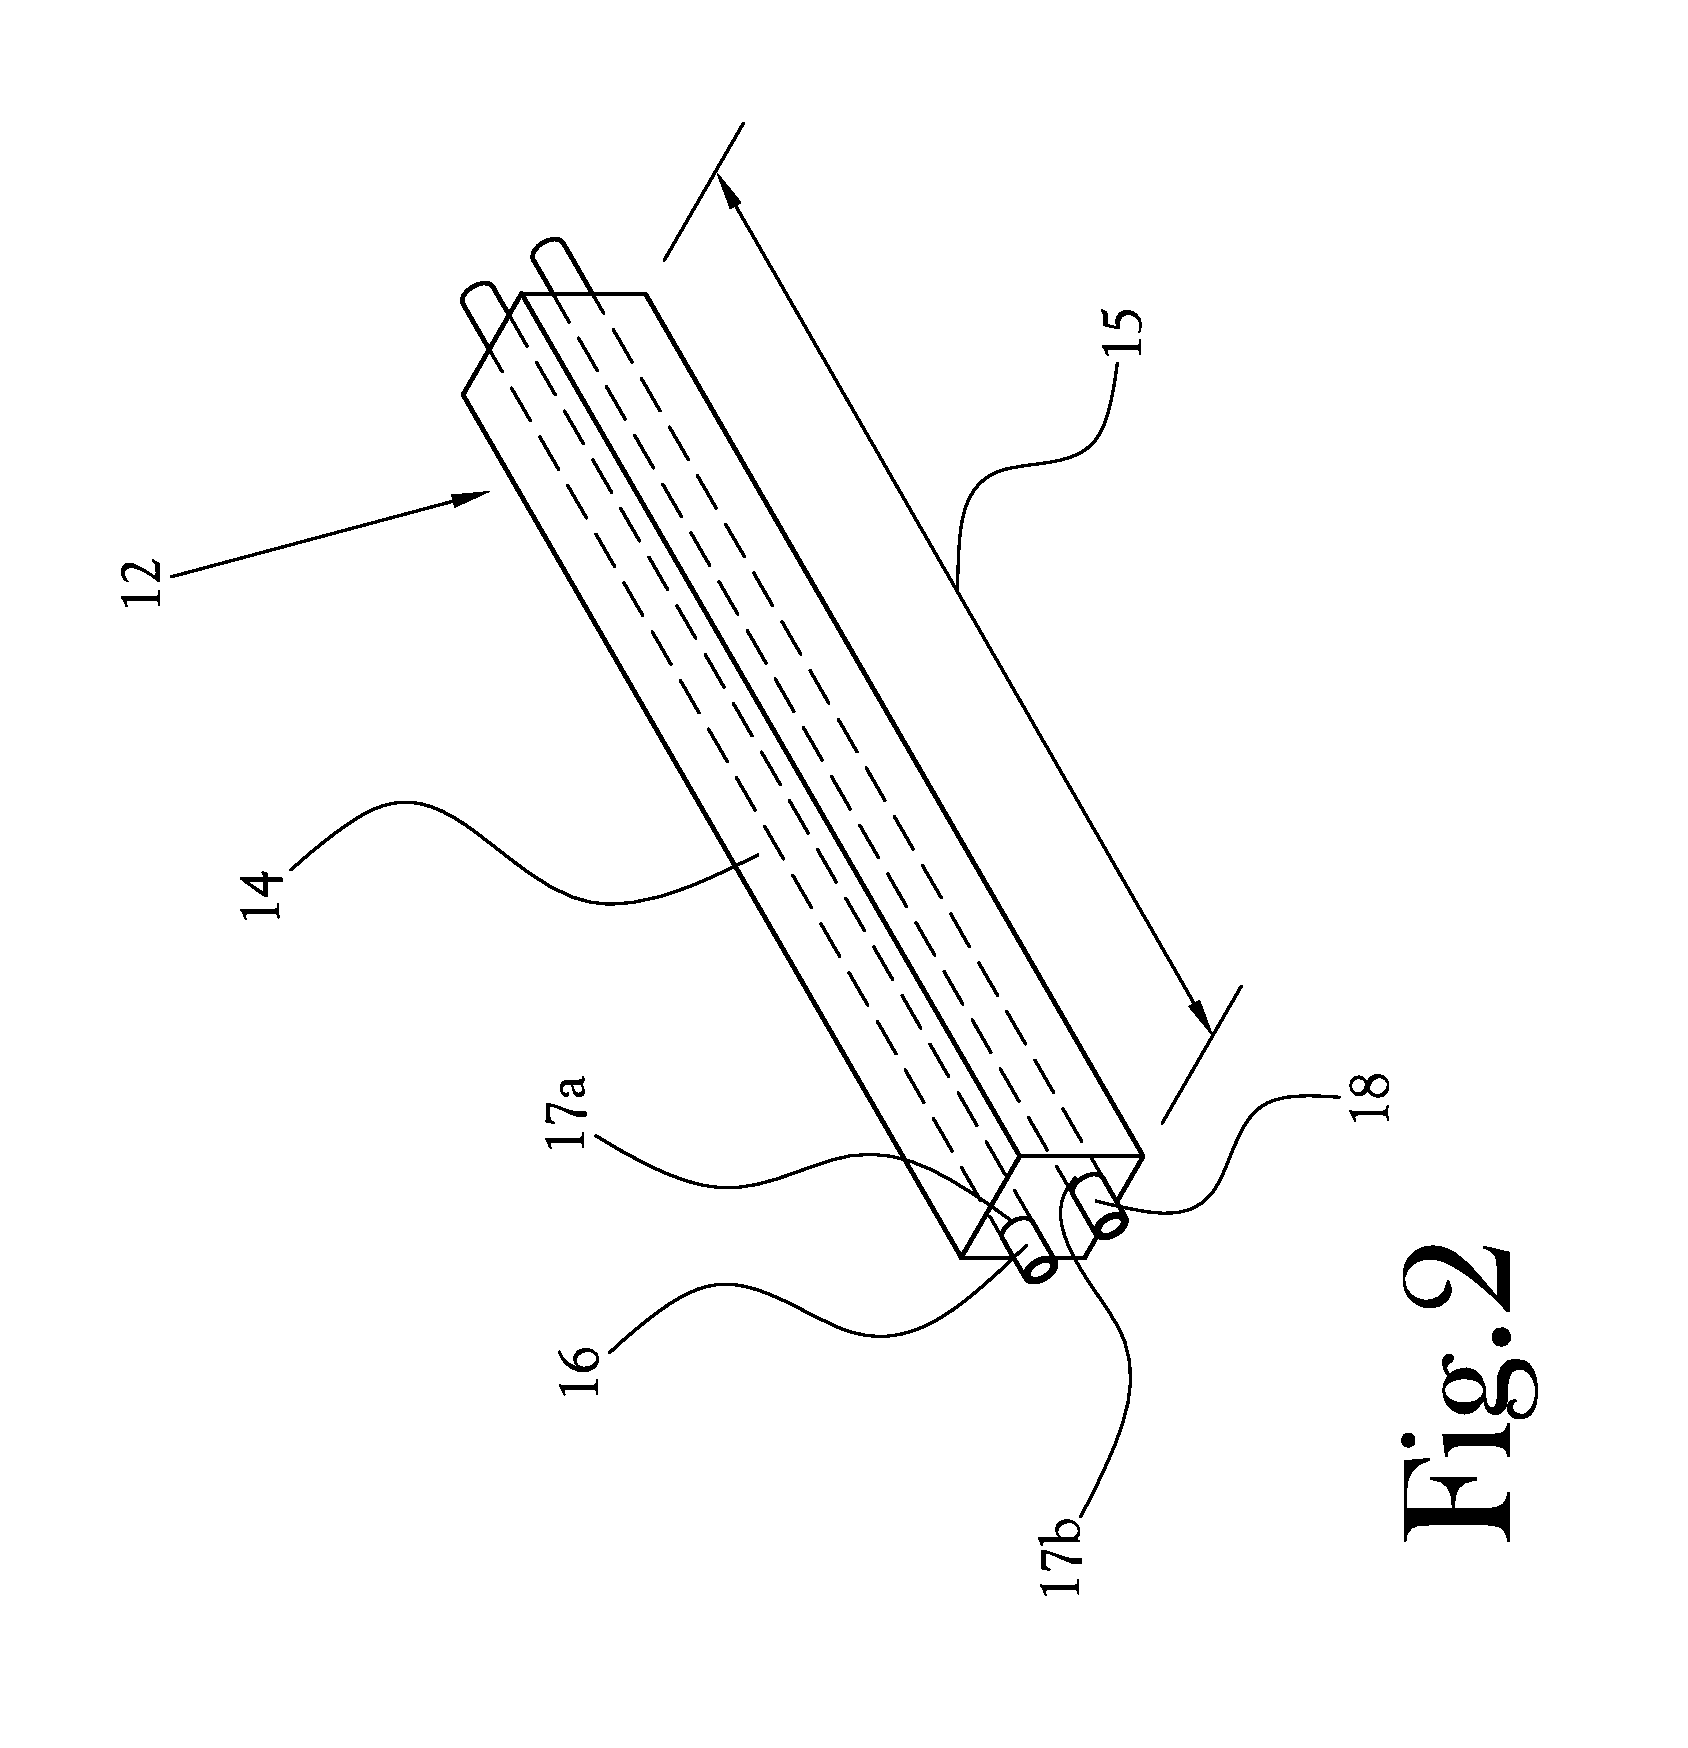 Modular Thermal Energy Retention and Transfer System